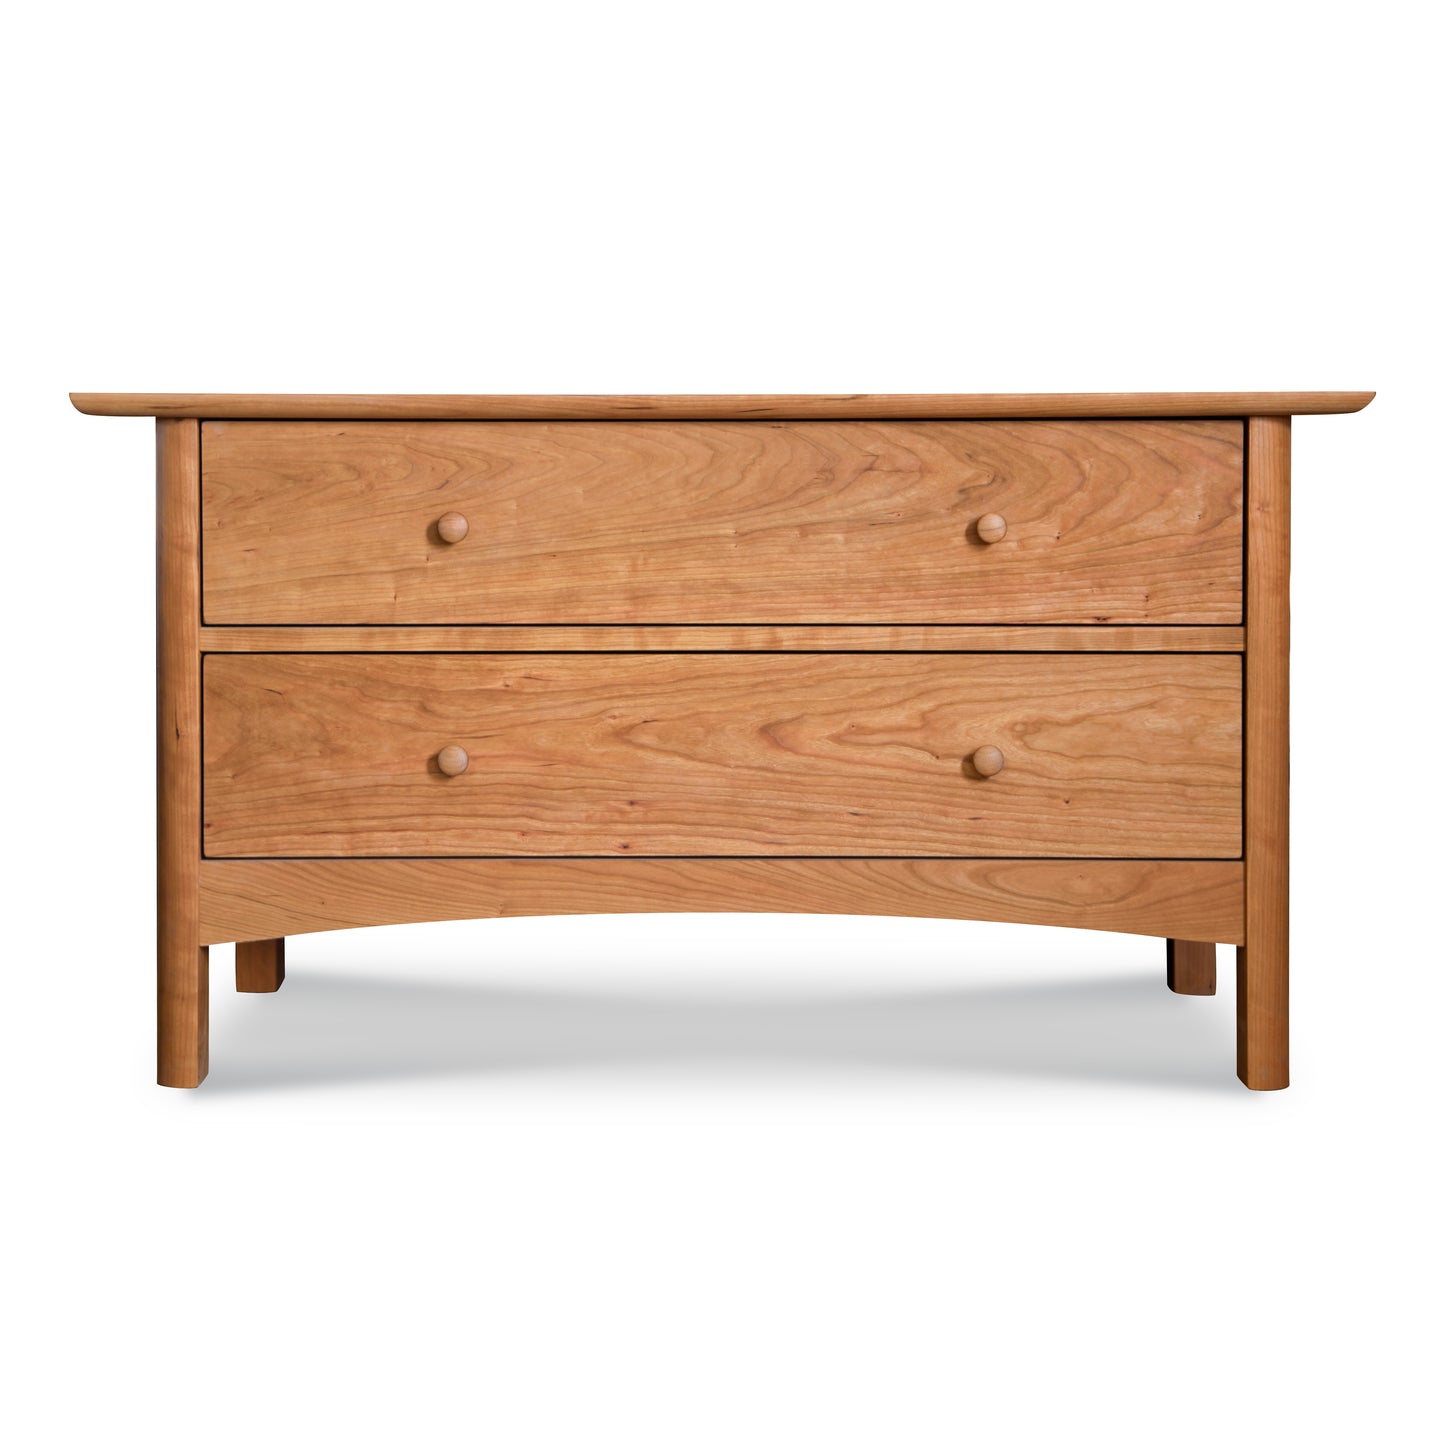 Contemporary Heartwood Shaker 2-Drawer Blanket Chest by Vermont Furniture Designs on a white background.